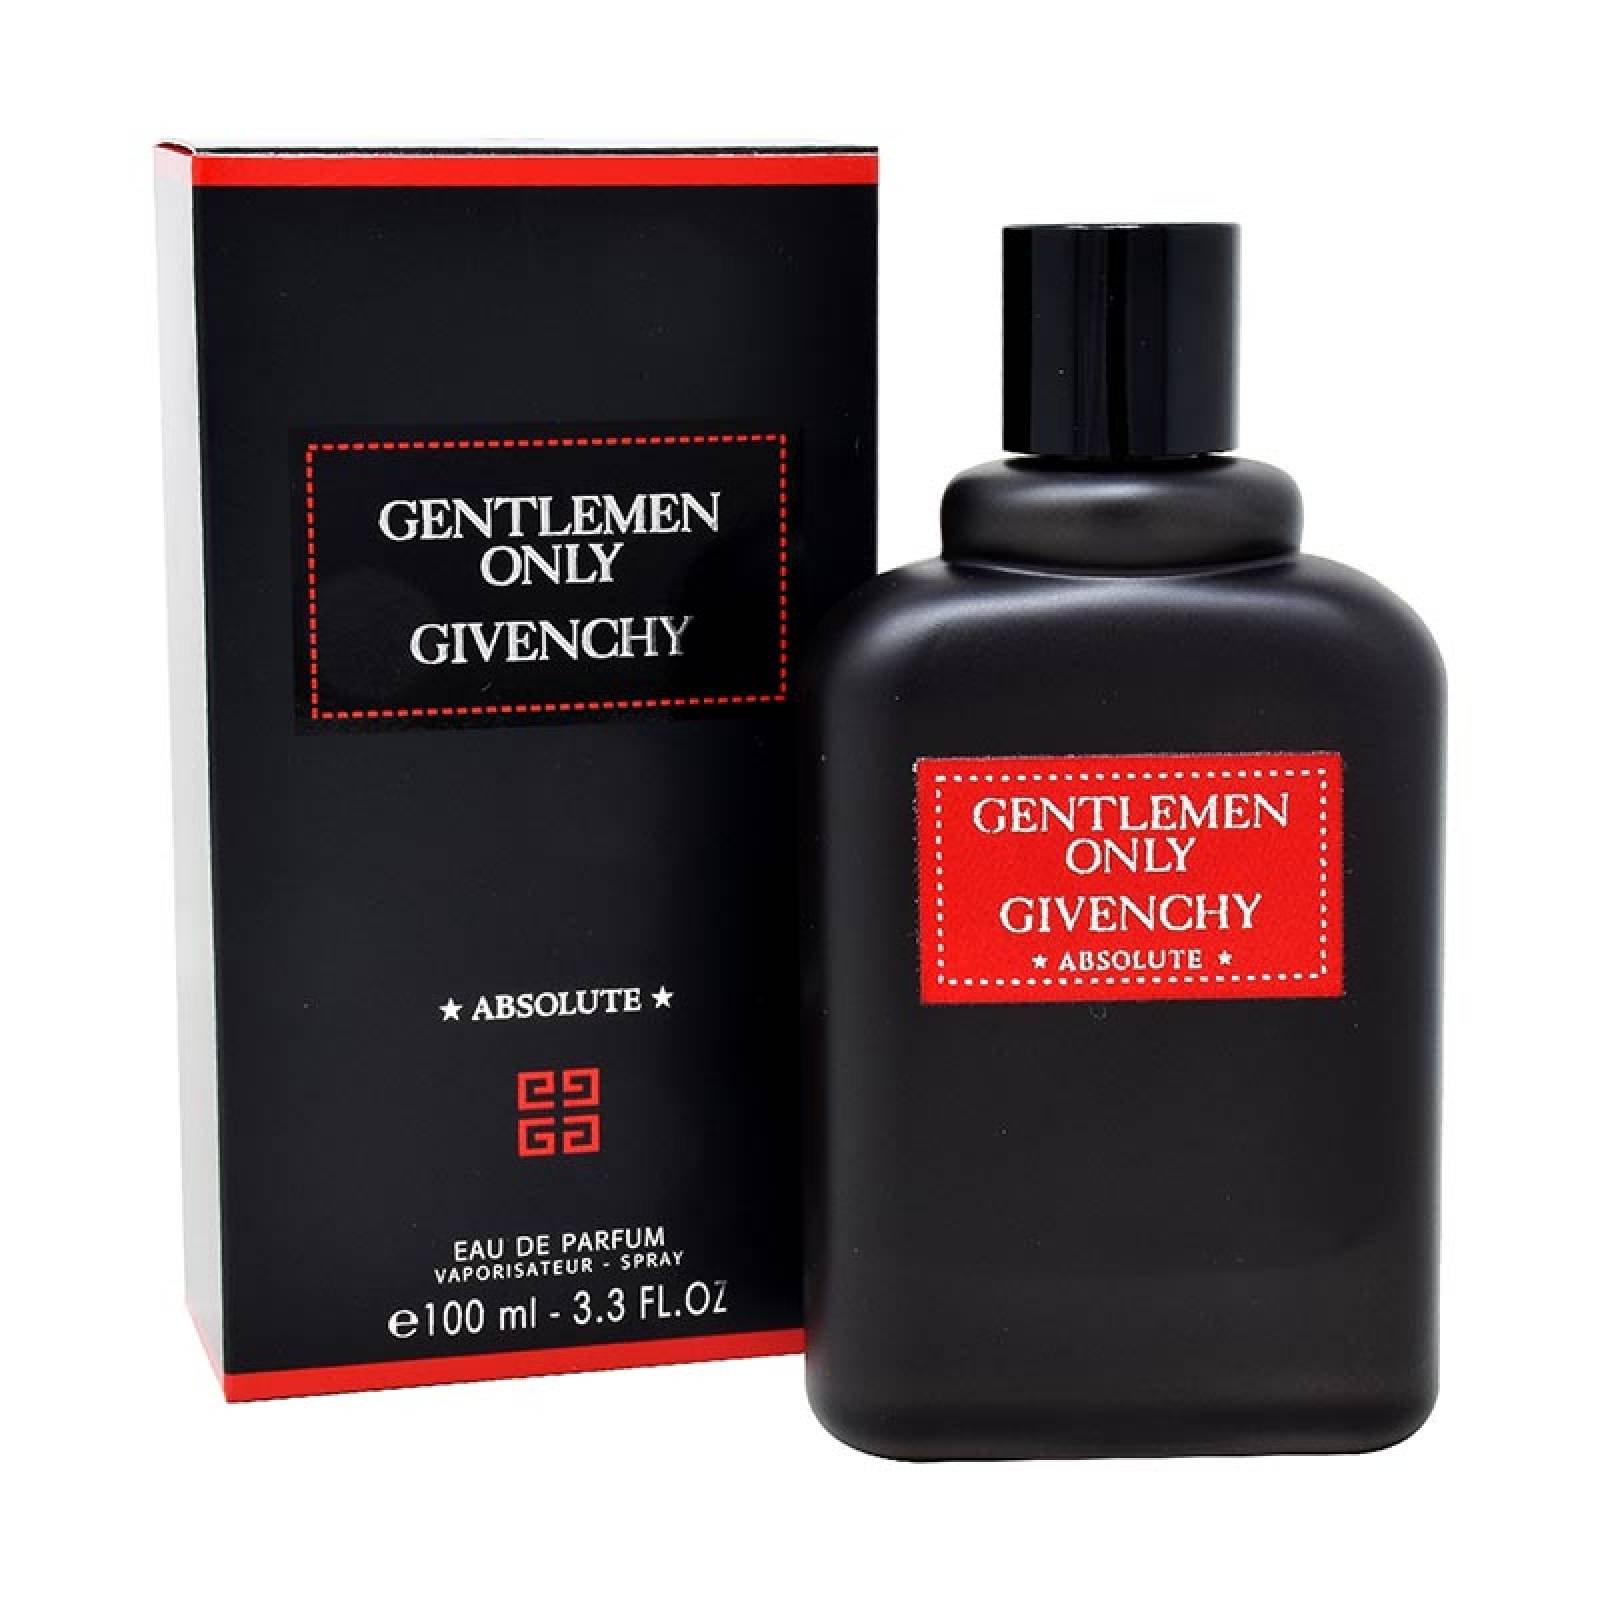 Gentlemen Only Absolute 100 ml Edp Spray de Givenchy